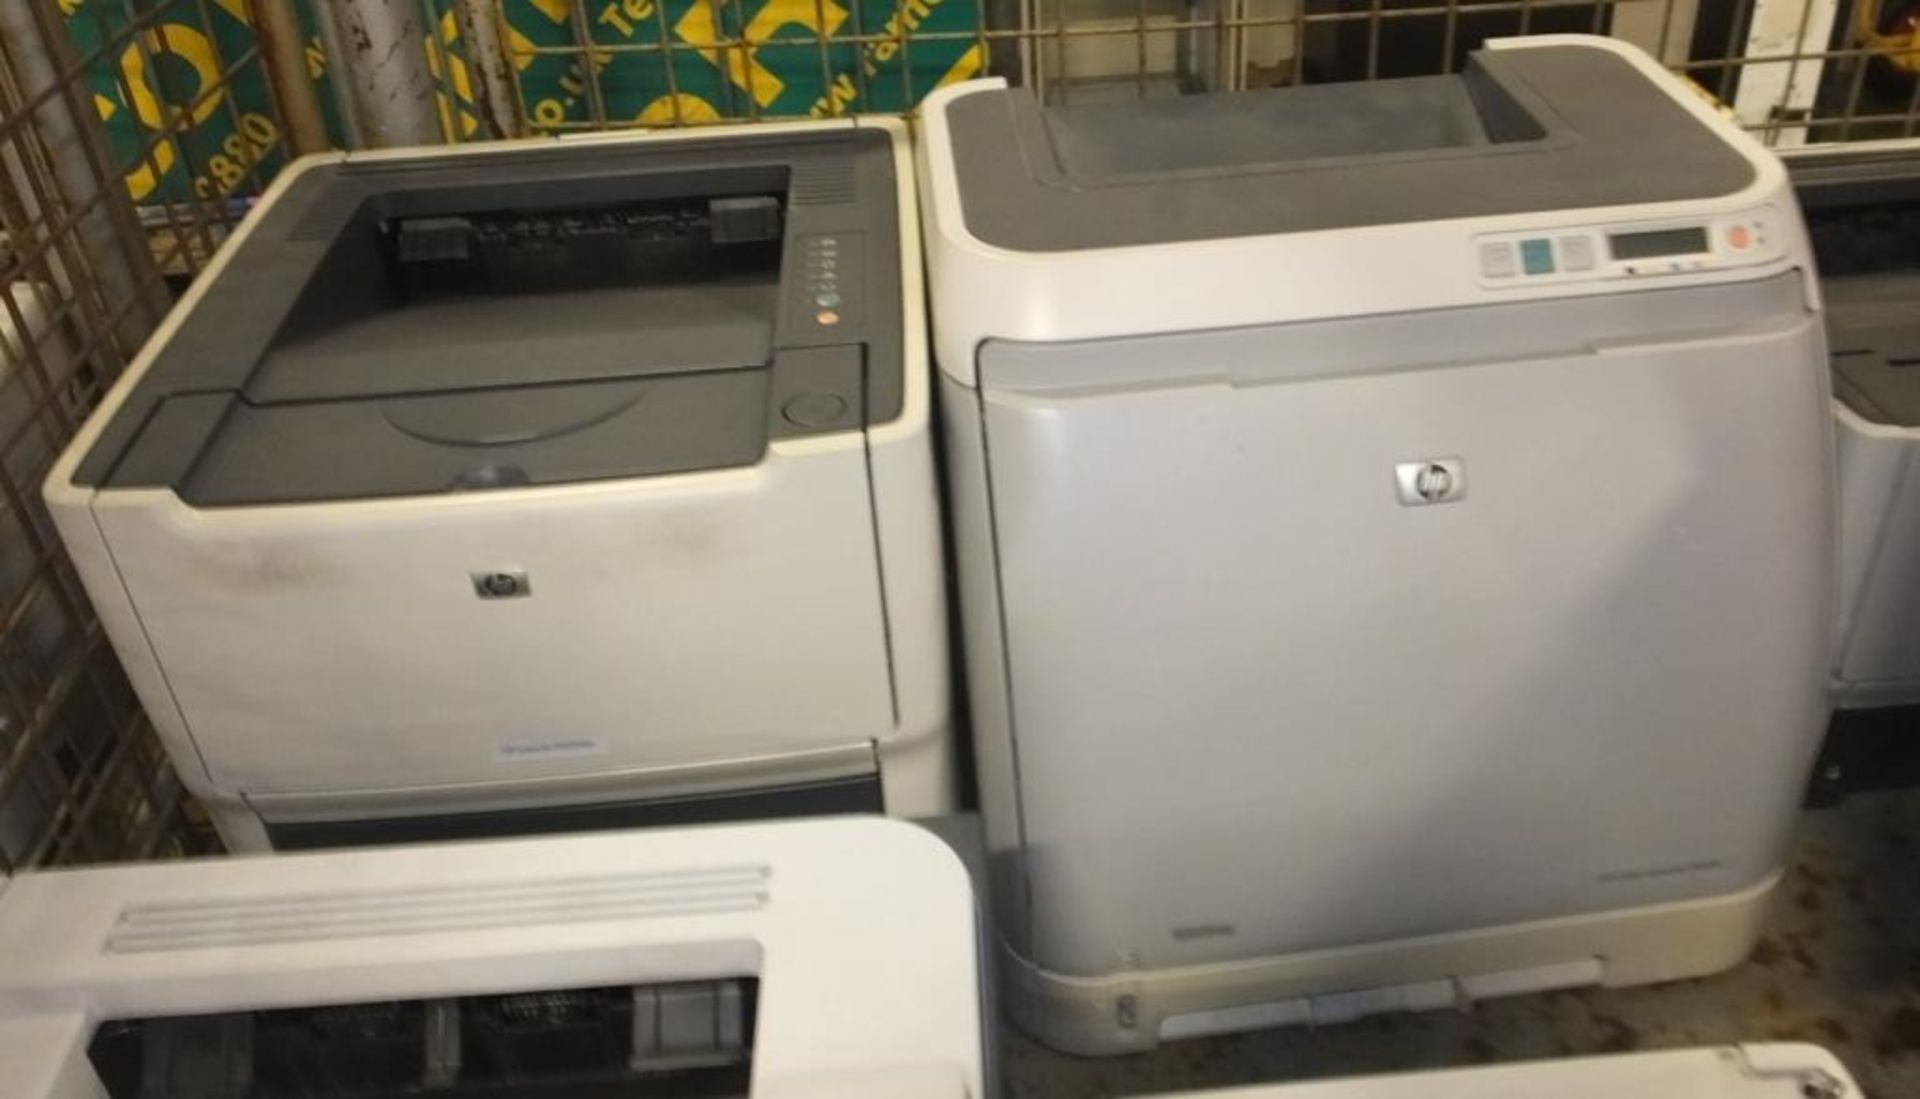 Office printers - Image 3 of 4